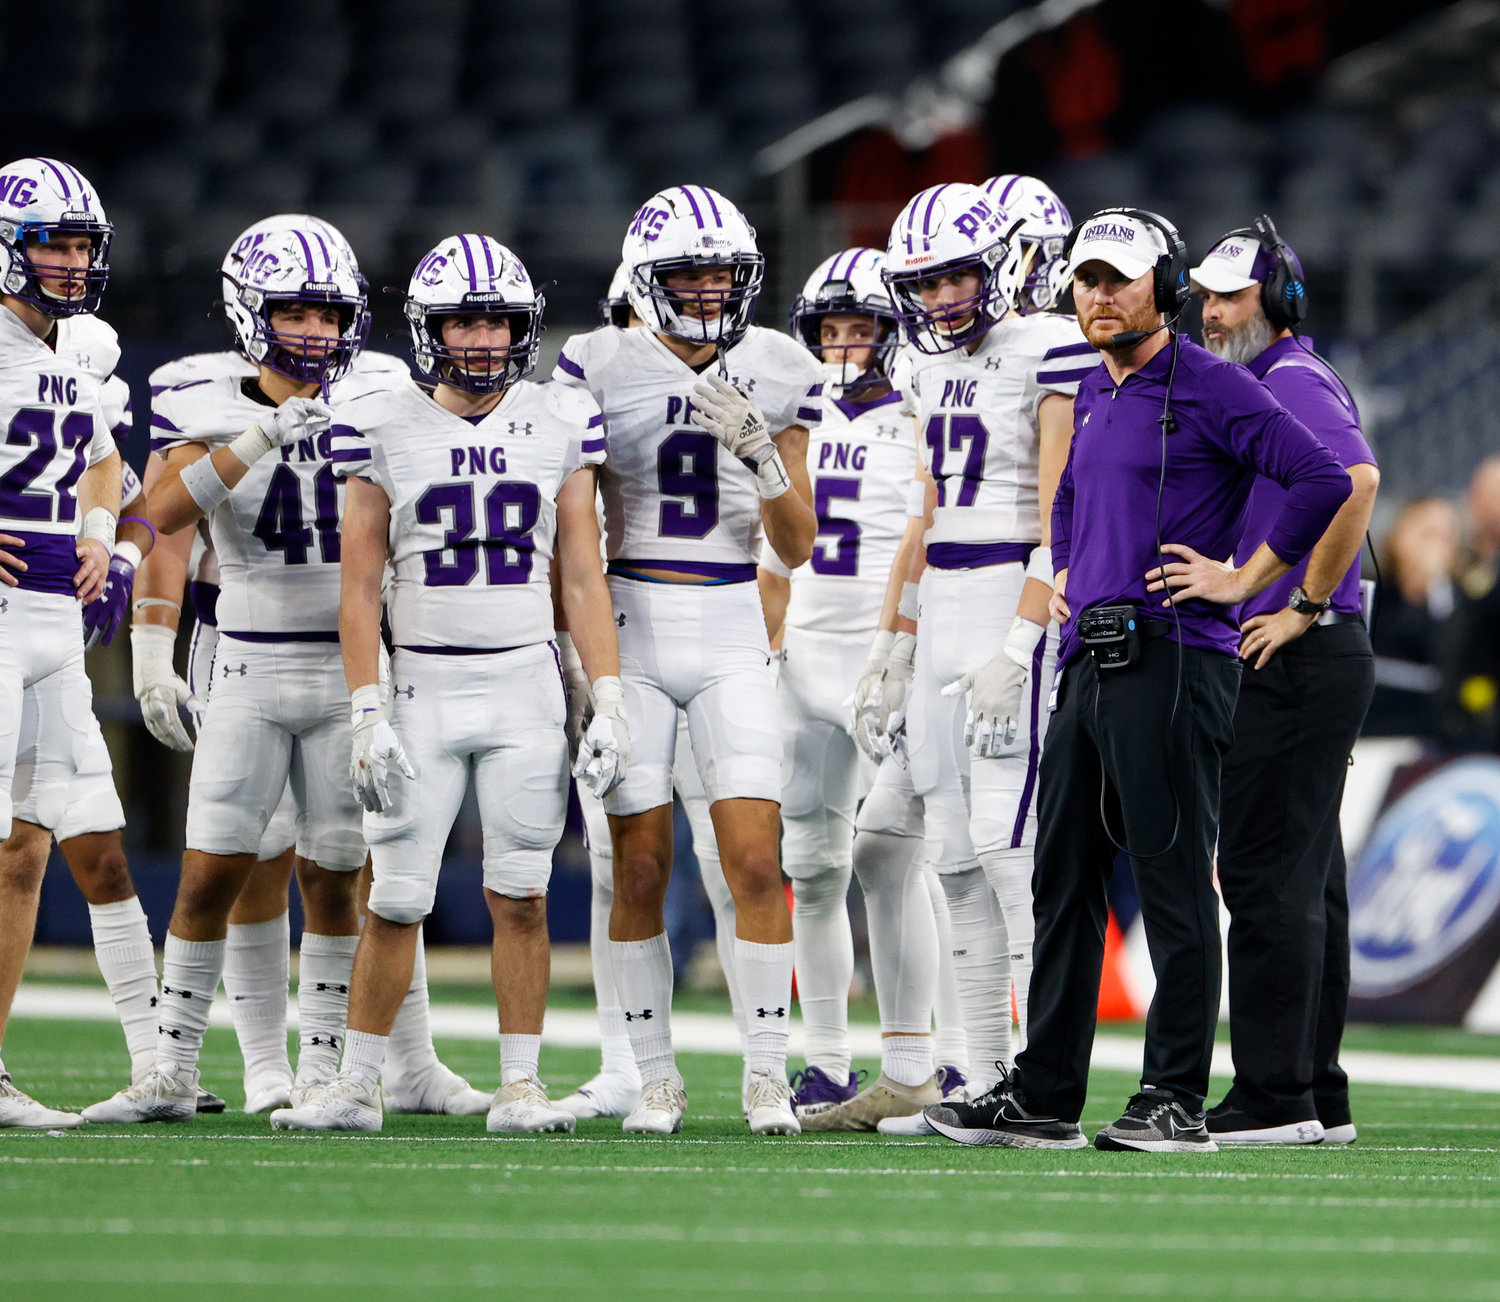 Port Neches-Groves head coach Jeff Joseph during the Class 5A Division II football state championship game between South Oak Cliff and Port Neches-Groves in Arlington, Texas, on Dec. 16, 2022.